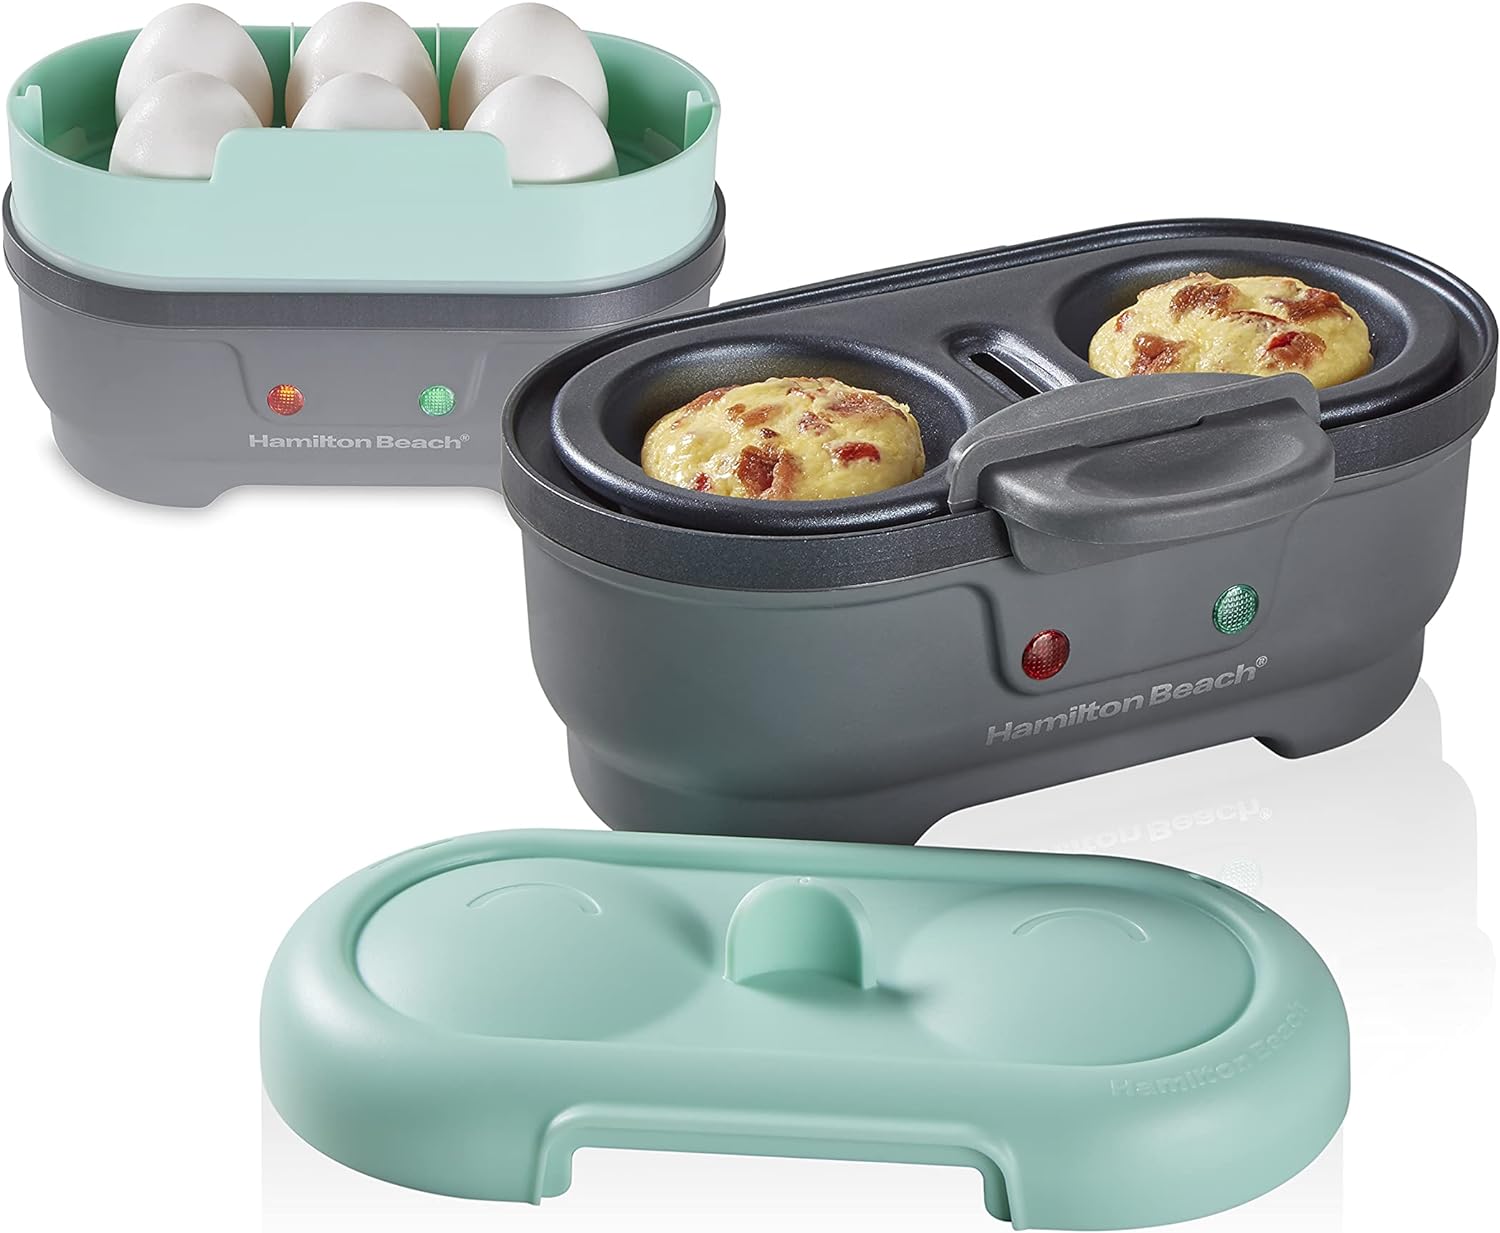 Hamilton Beach Sous Vide Style Electric Egg Bite Maker, Hard Boiled Egg Cooker  Poacher with Removable Nonstick Tray, Makes 2 in Under 10 Minutes, Teal (25511)